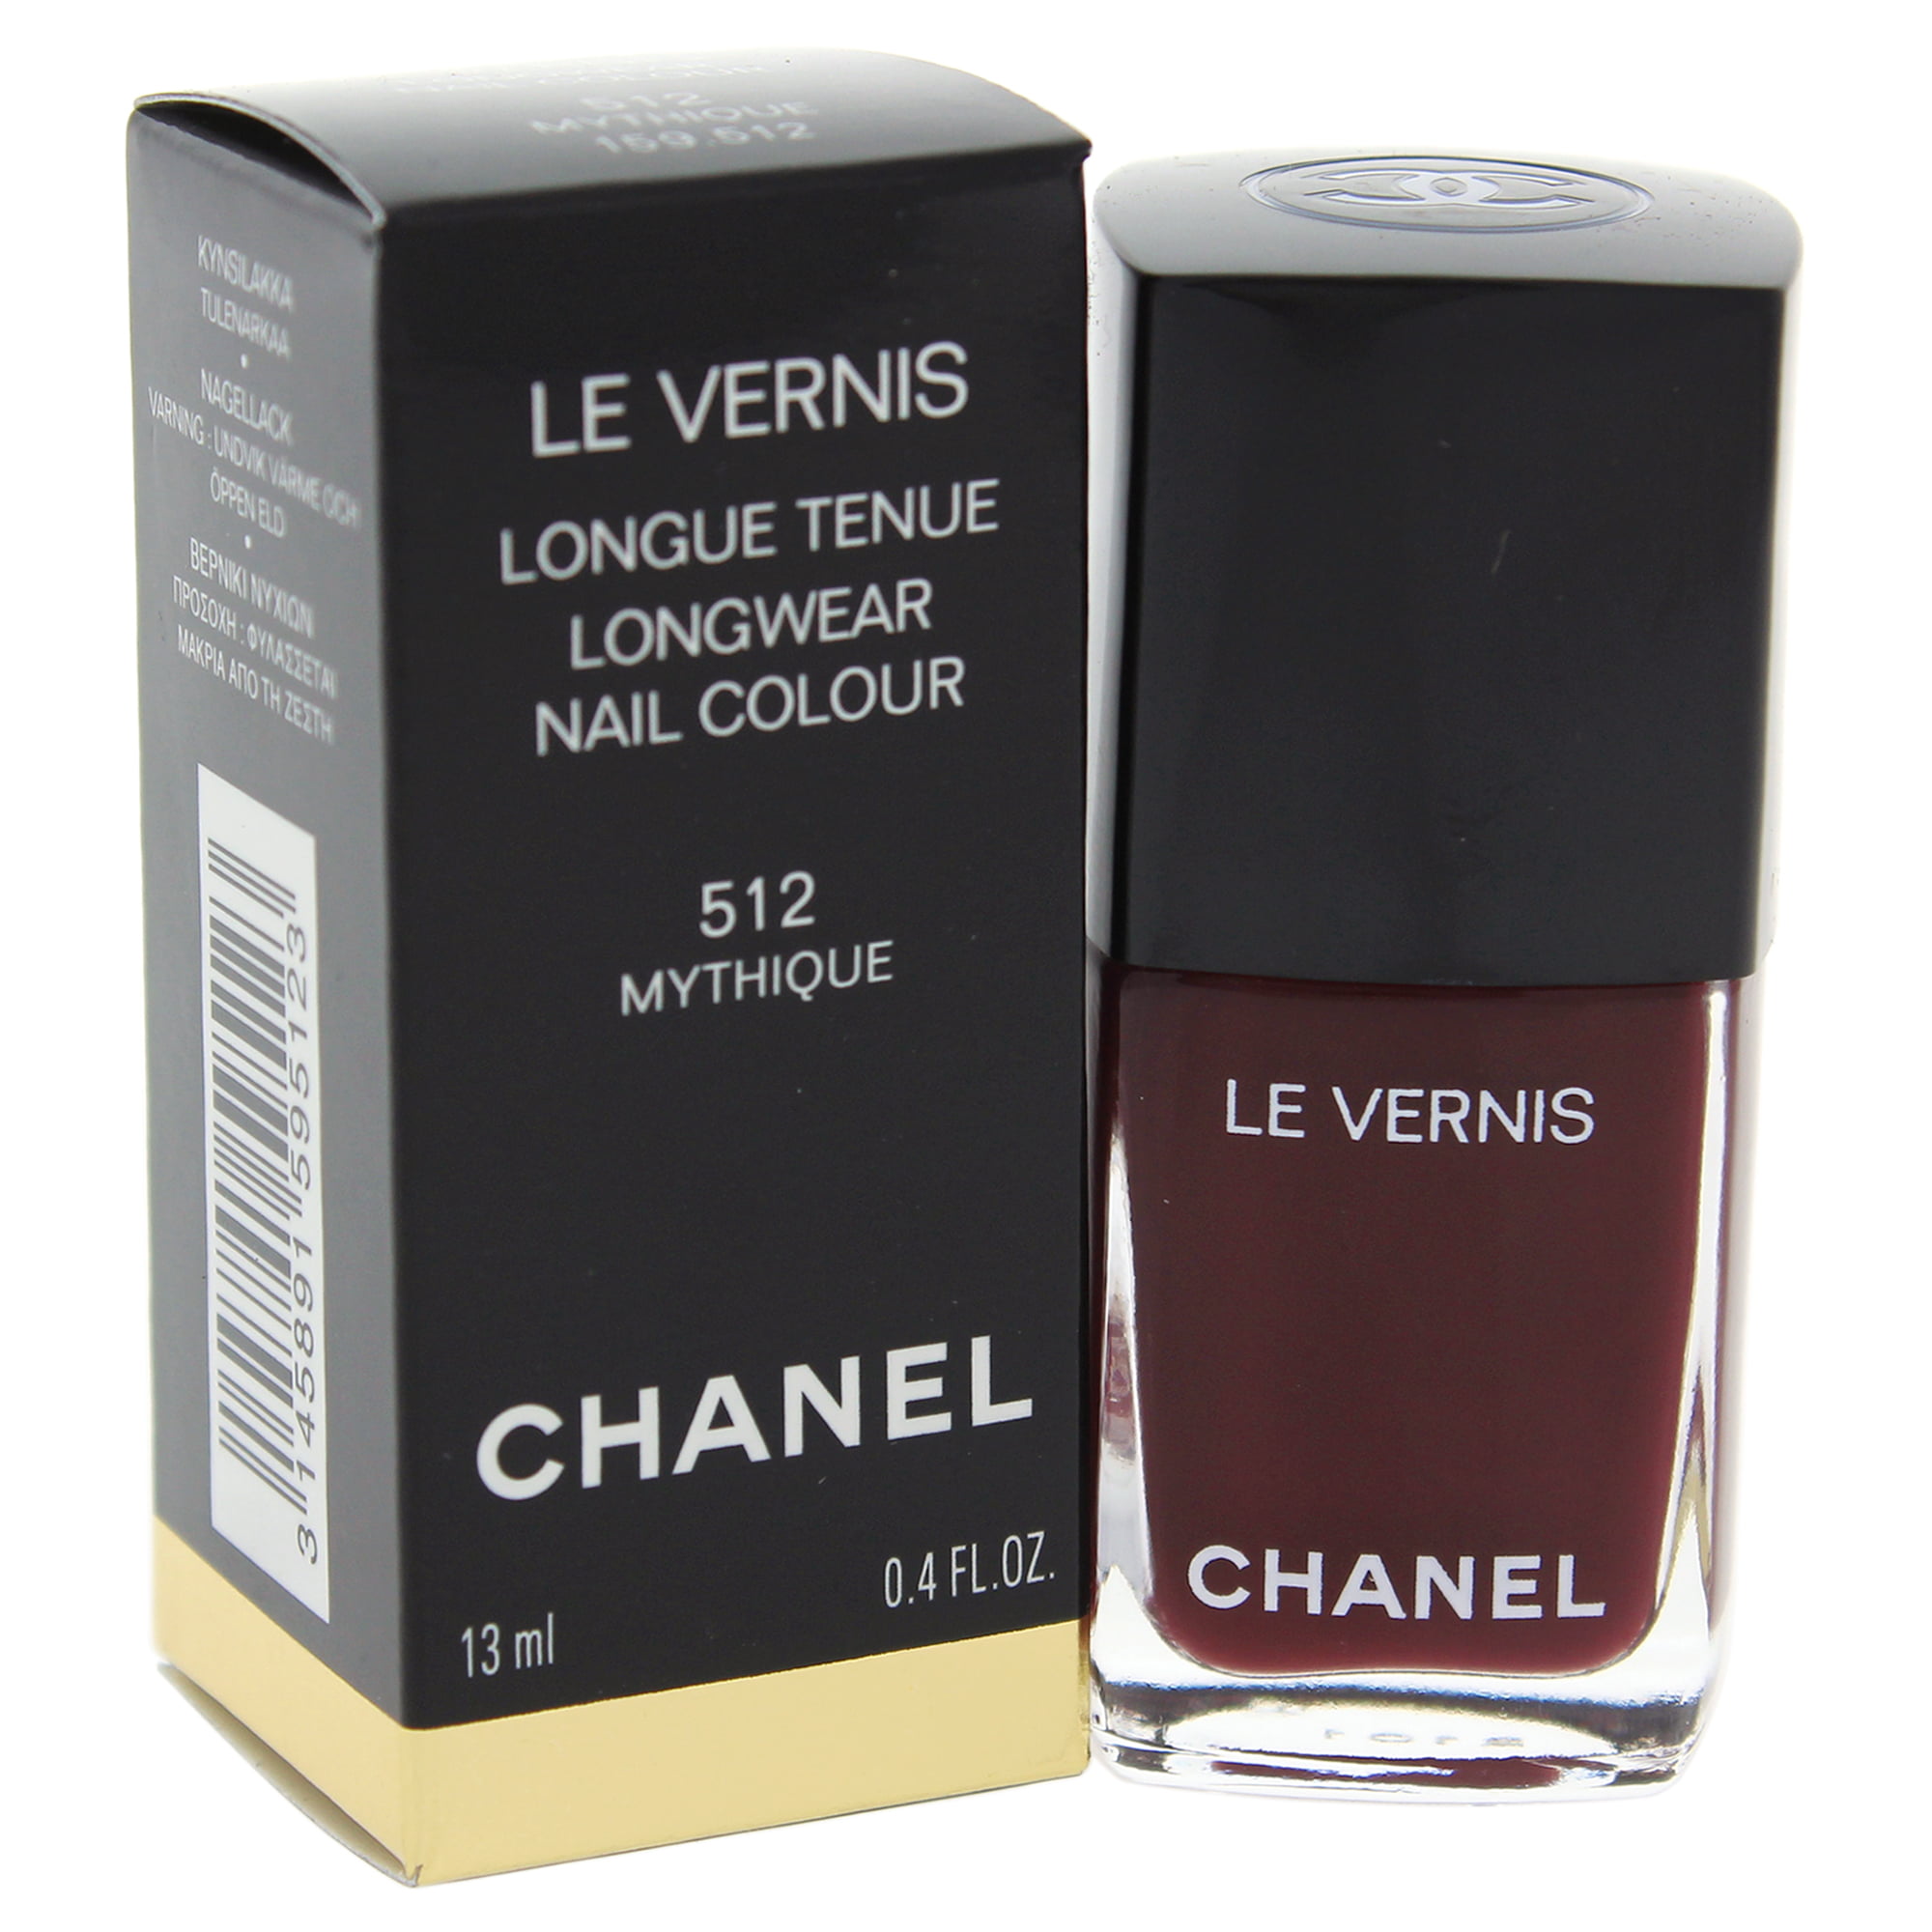 CHANEL - Le Vernis Longwear Nail Colour - 512 Mythique by Chanel for ...